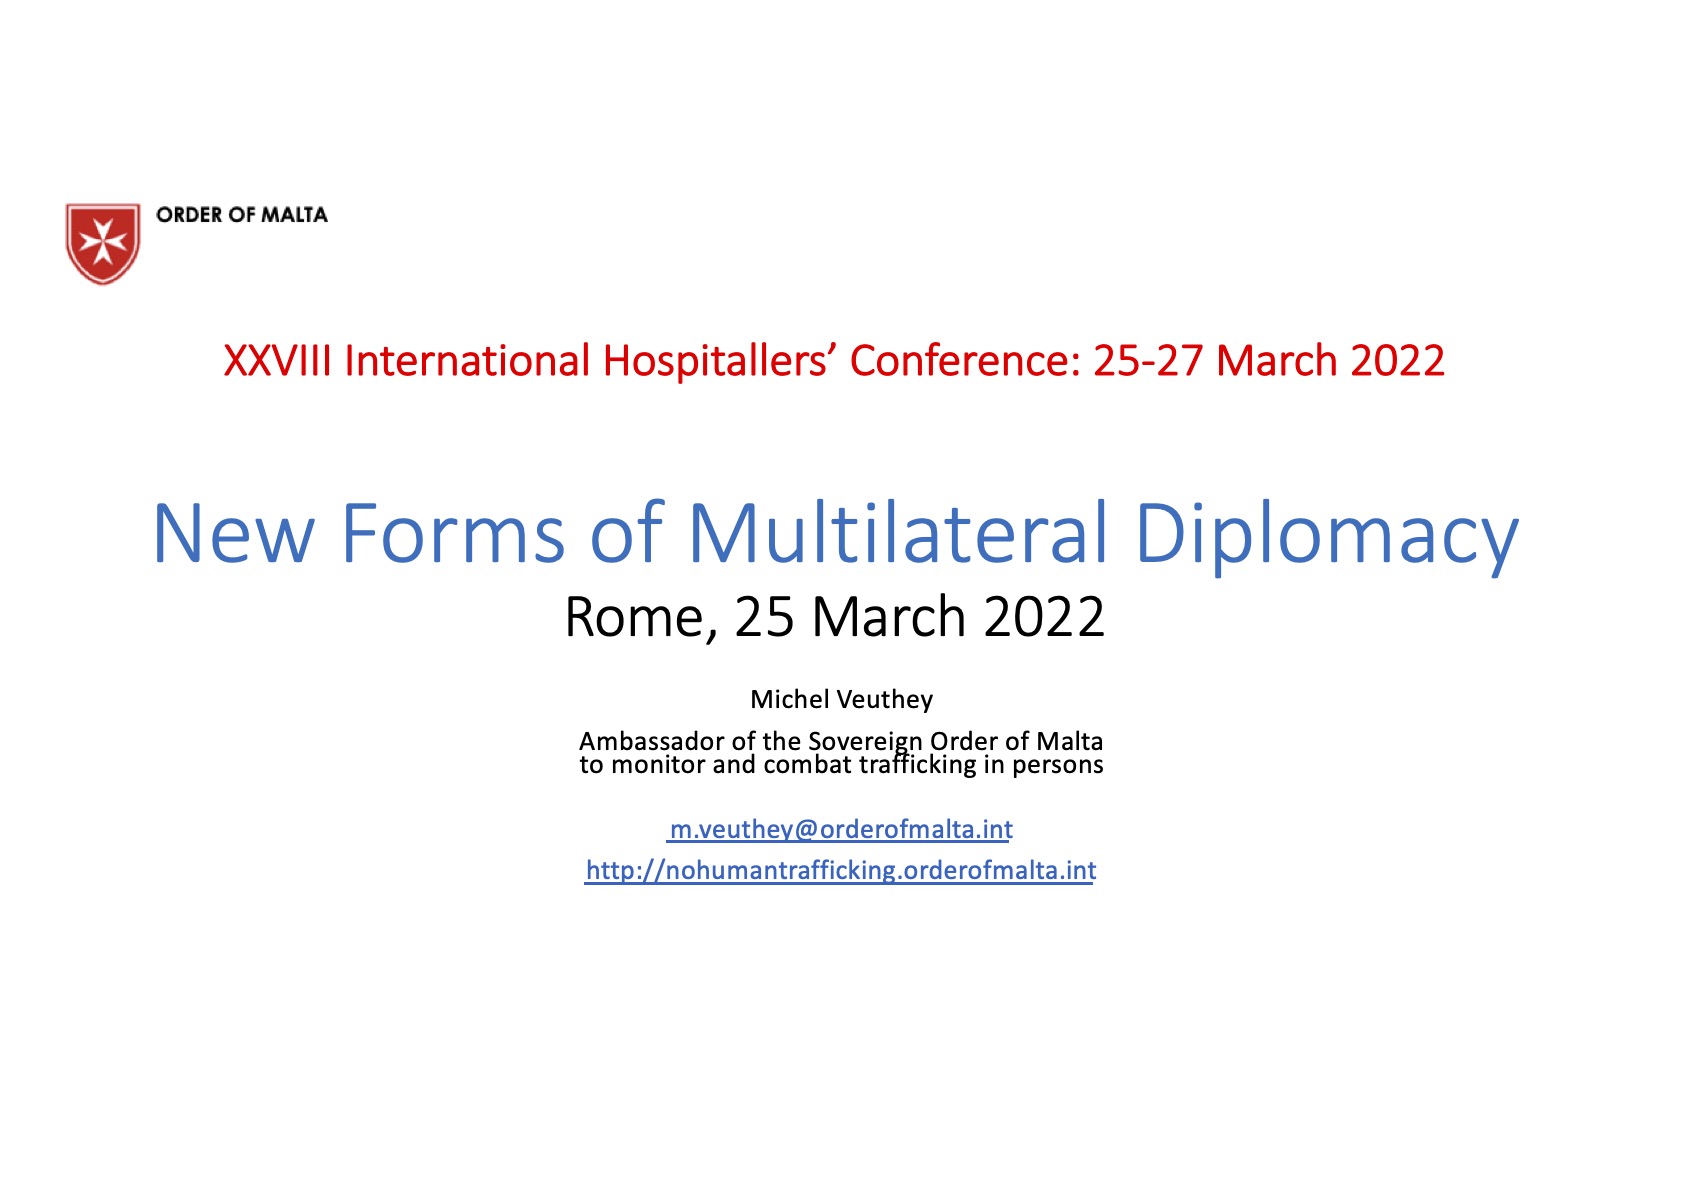 New Forms of Multilateral Diplomacy – XXVIII International Hospitallers’ Conference in Rome 25-27 March 2022